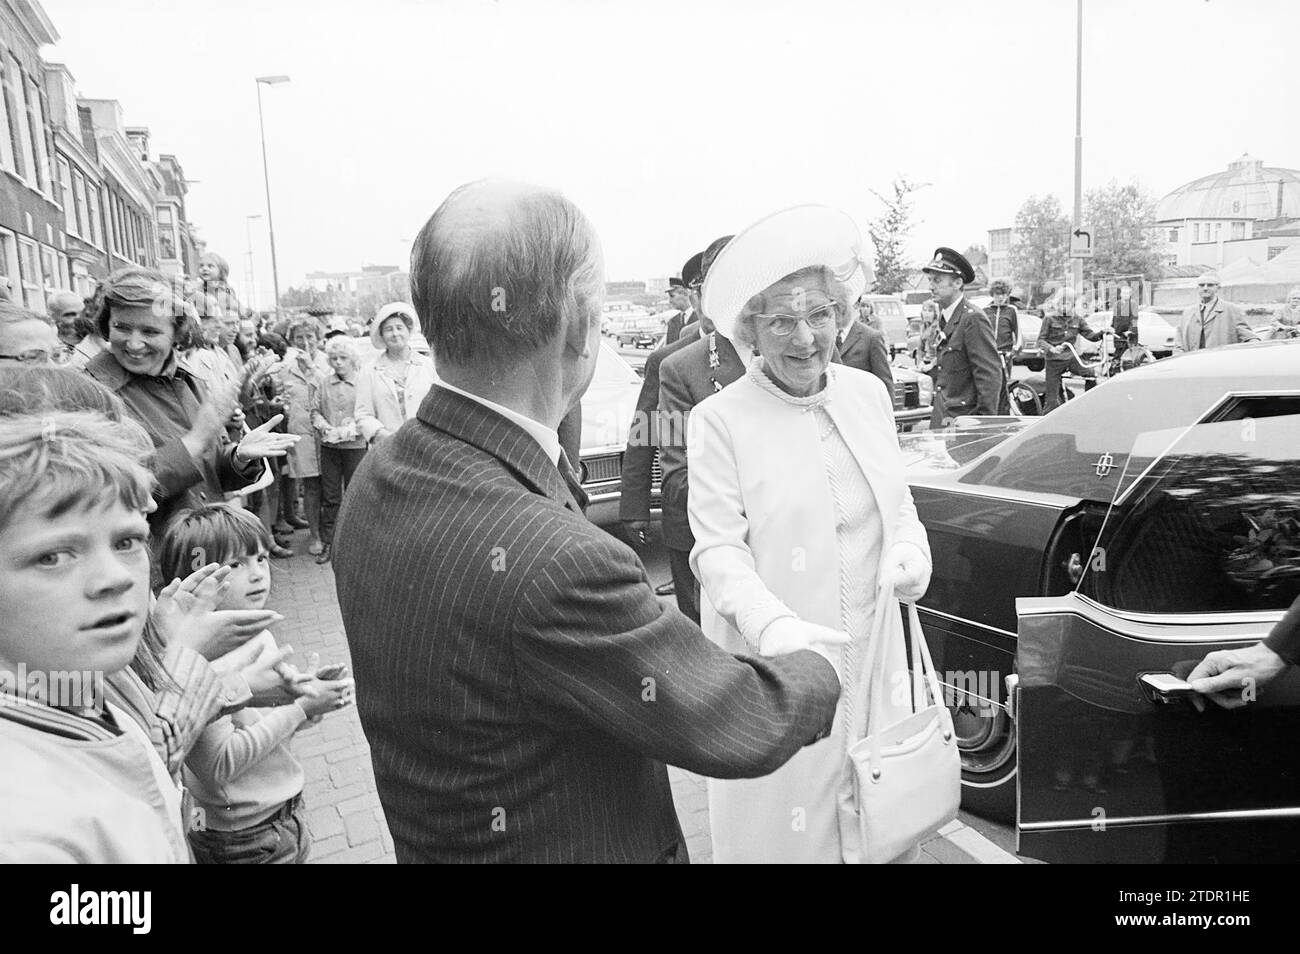 Arrival and departure of HM at the official residence of the mayor, Royal receptions and Royal visits, 30-06-1972, Whizgle News from the Past, Tailored for the Future. Explore historical narratives, Dutch The Netherlands agency image with a modern perspective, bridging the gap between yesterday's events and tomorrow's insights. A timeless journey shaping the stories that shape our future Stock Photo